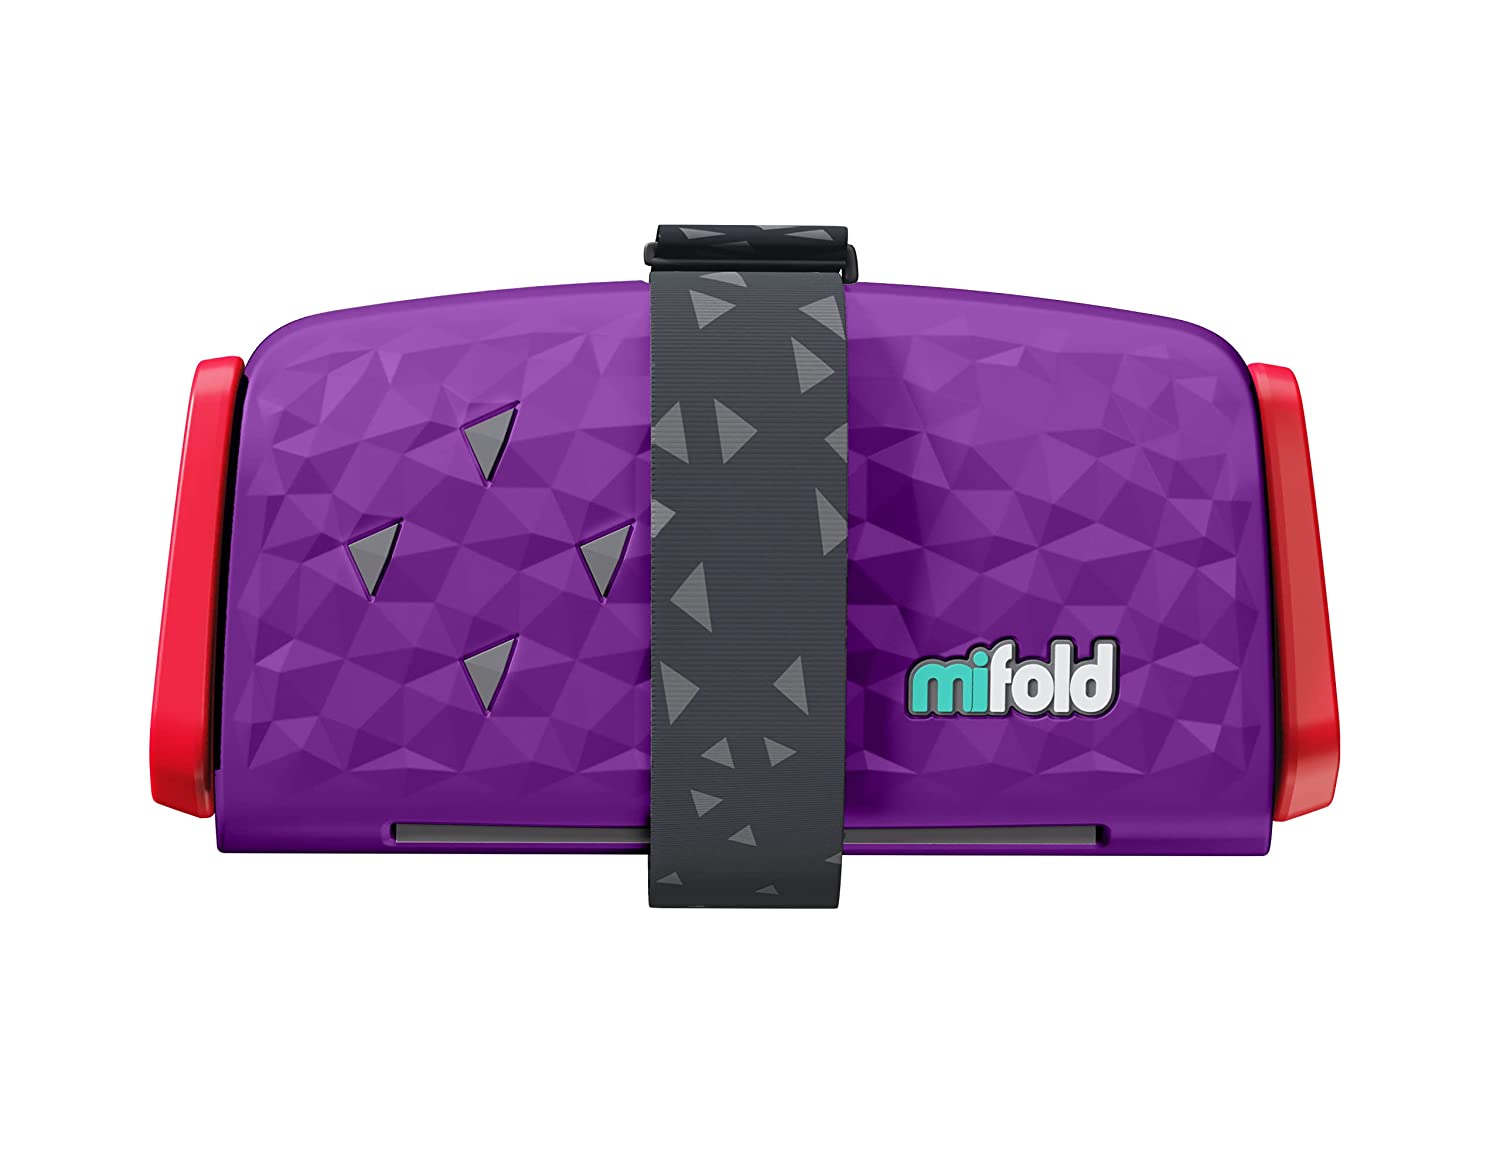 mifold Comfort: the mobile child seat, compact and portable for everyday use